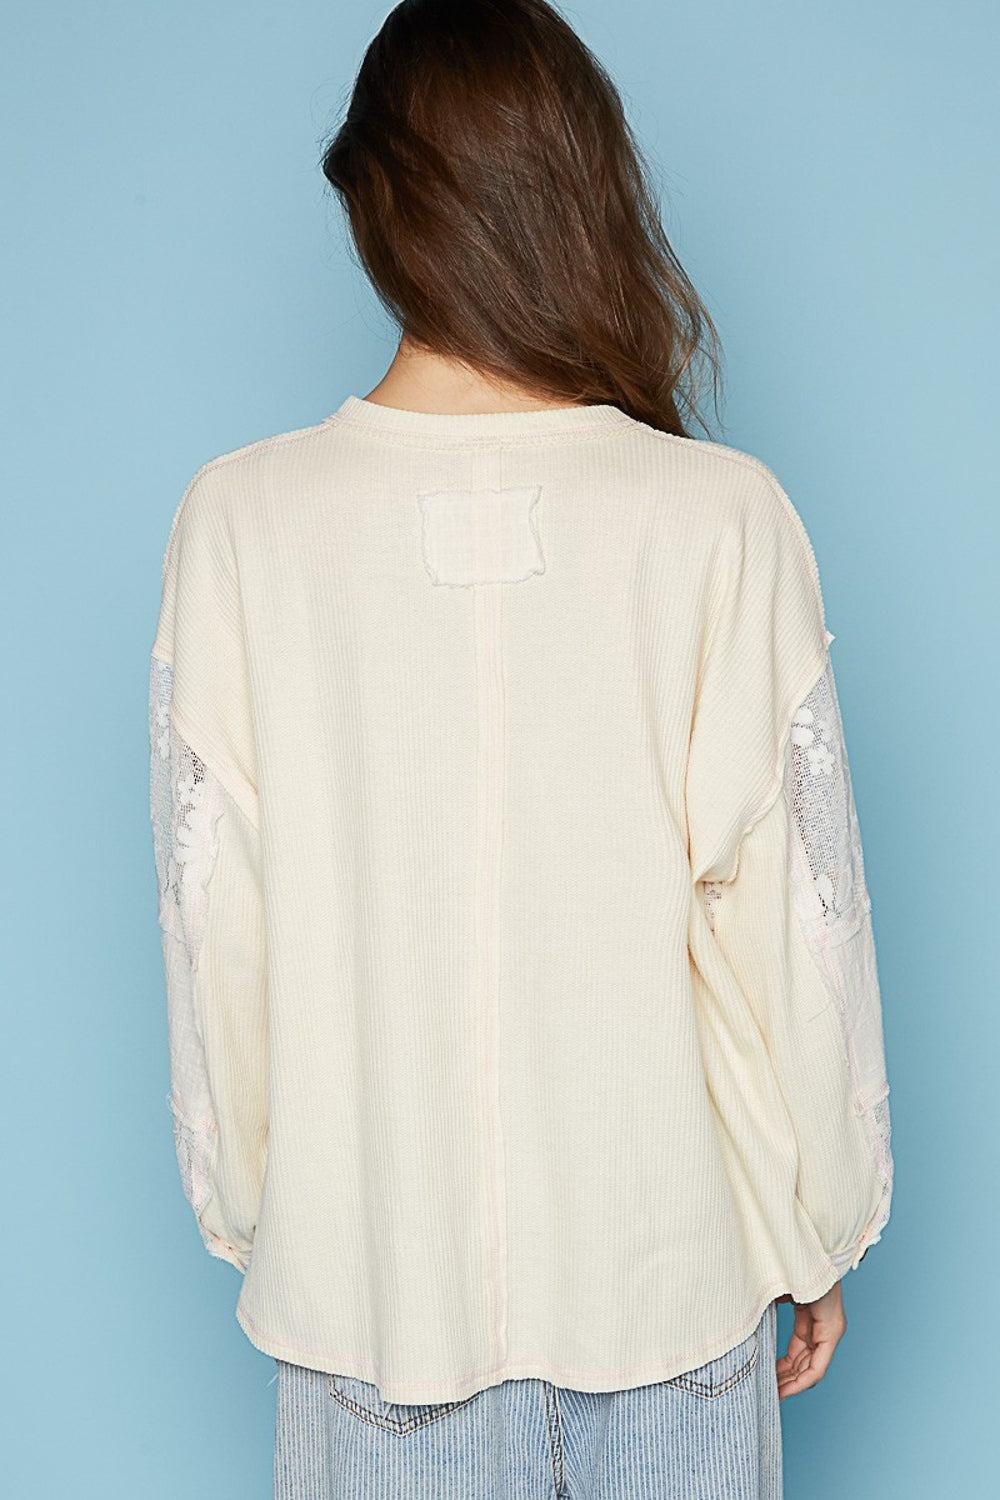 V-Neck Lace Balloon Sleeve Exposed Seam Top in Cream